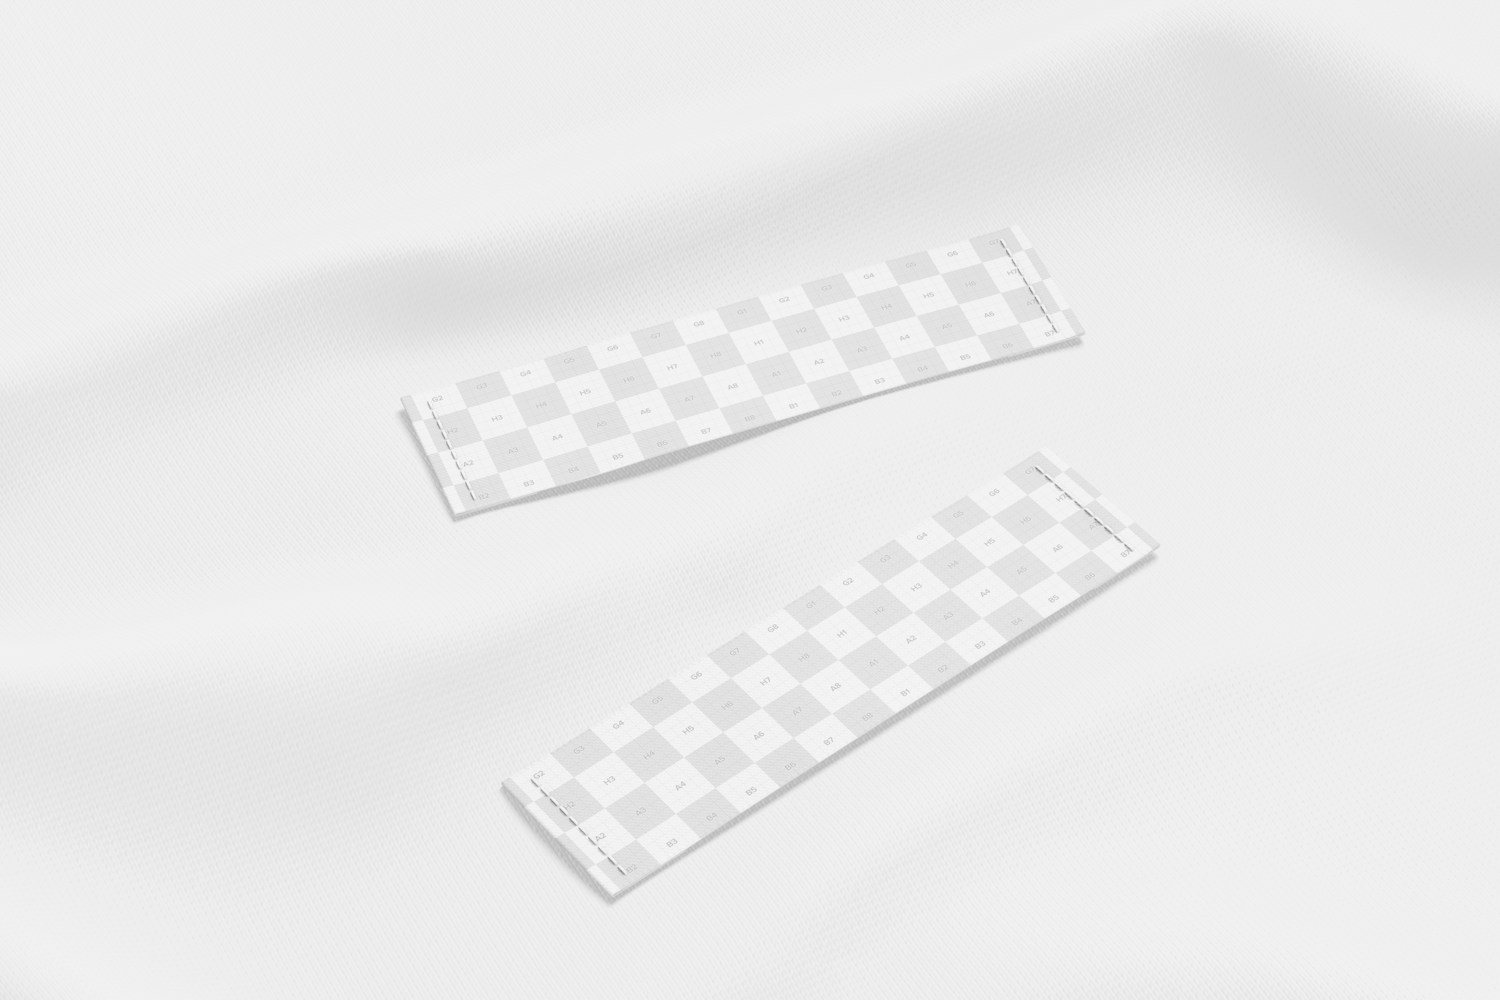 Rectangular Clothing Tags Mockup, Perspective